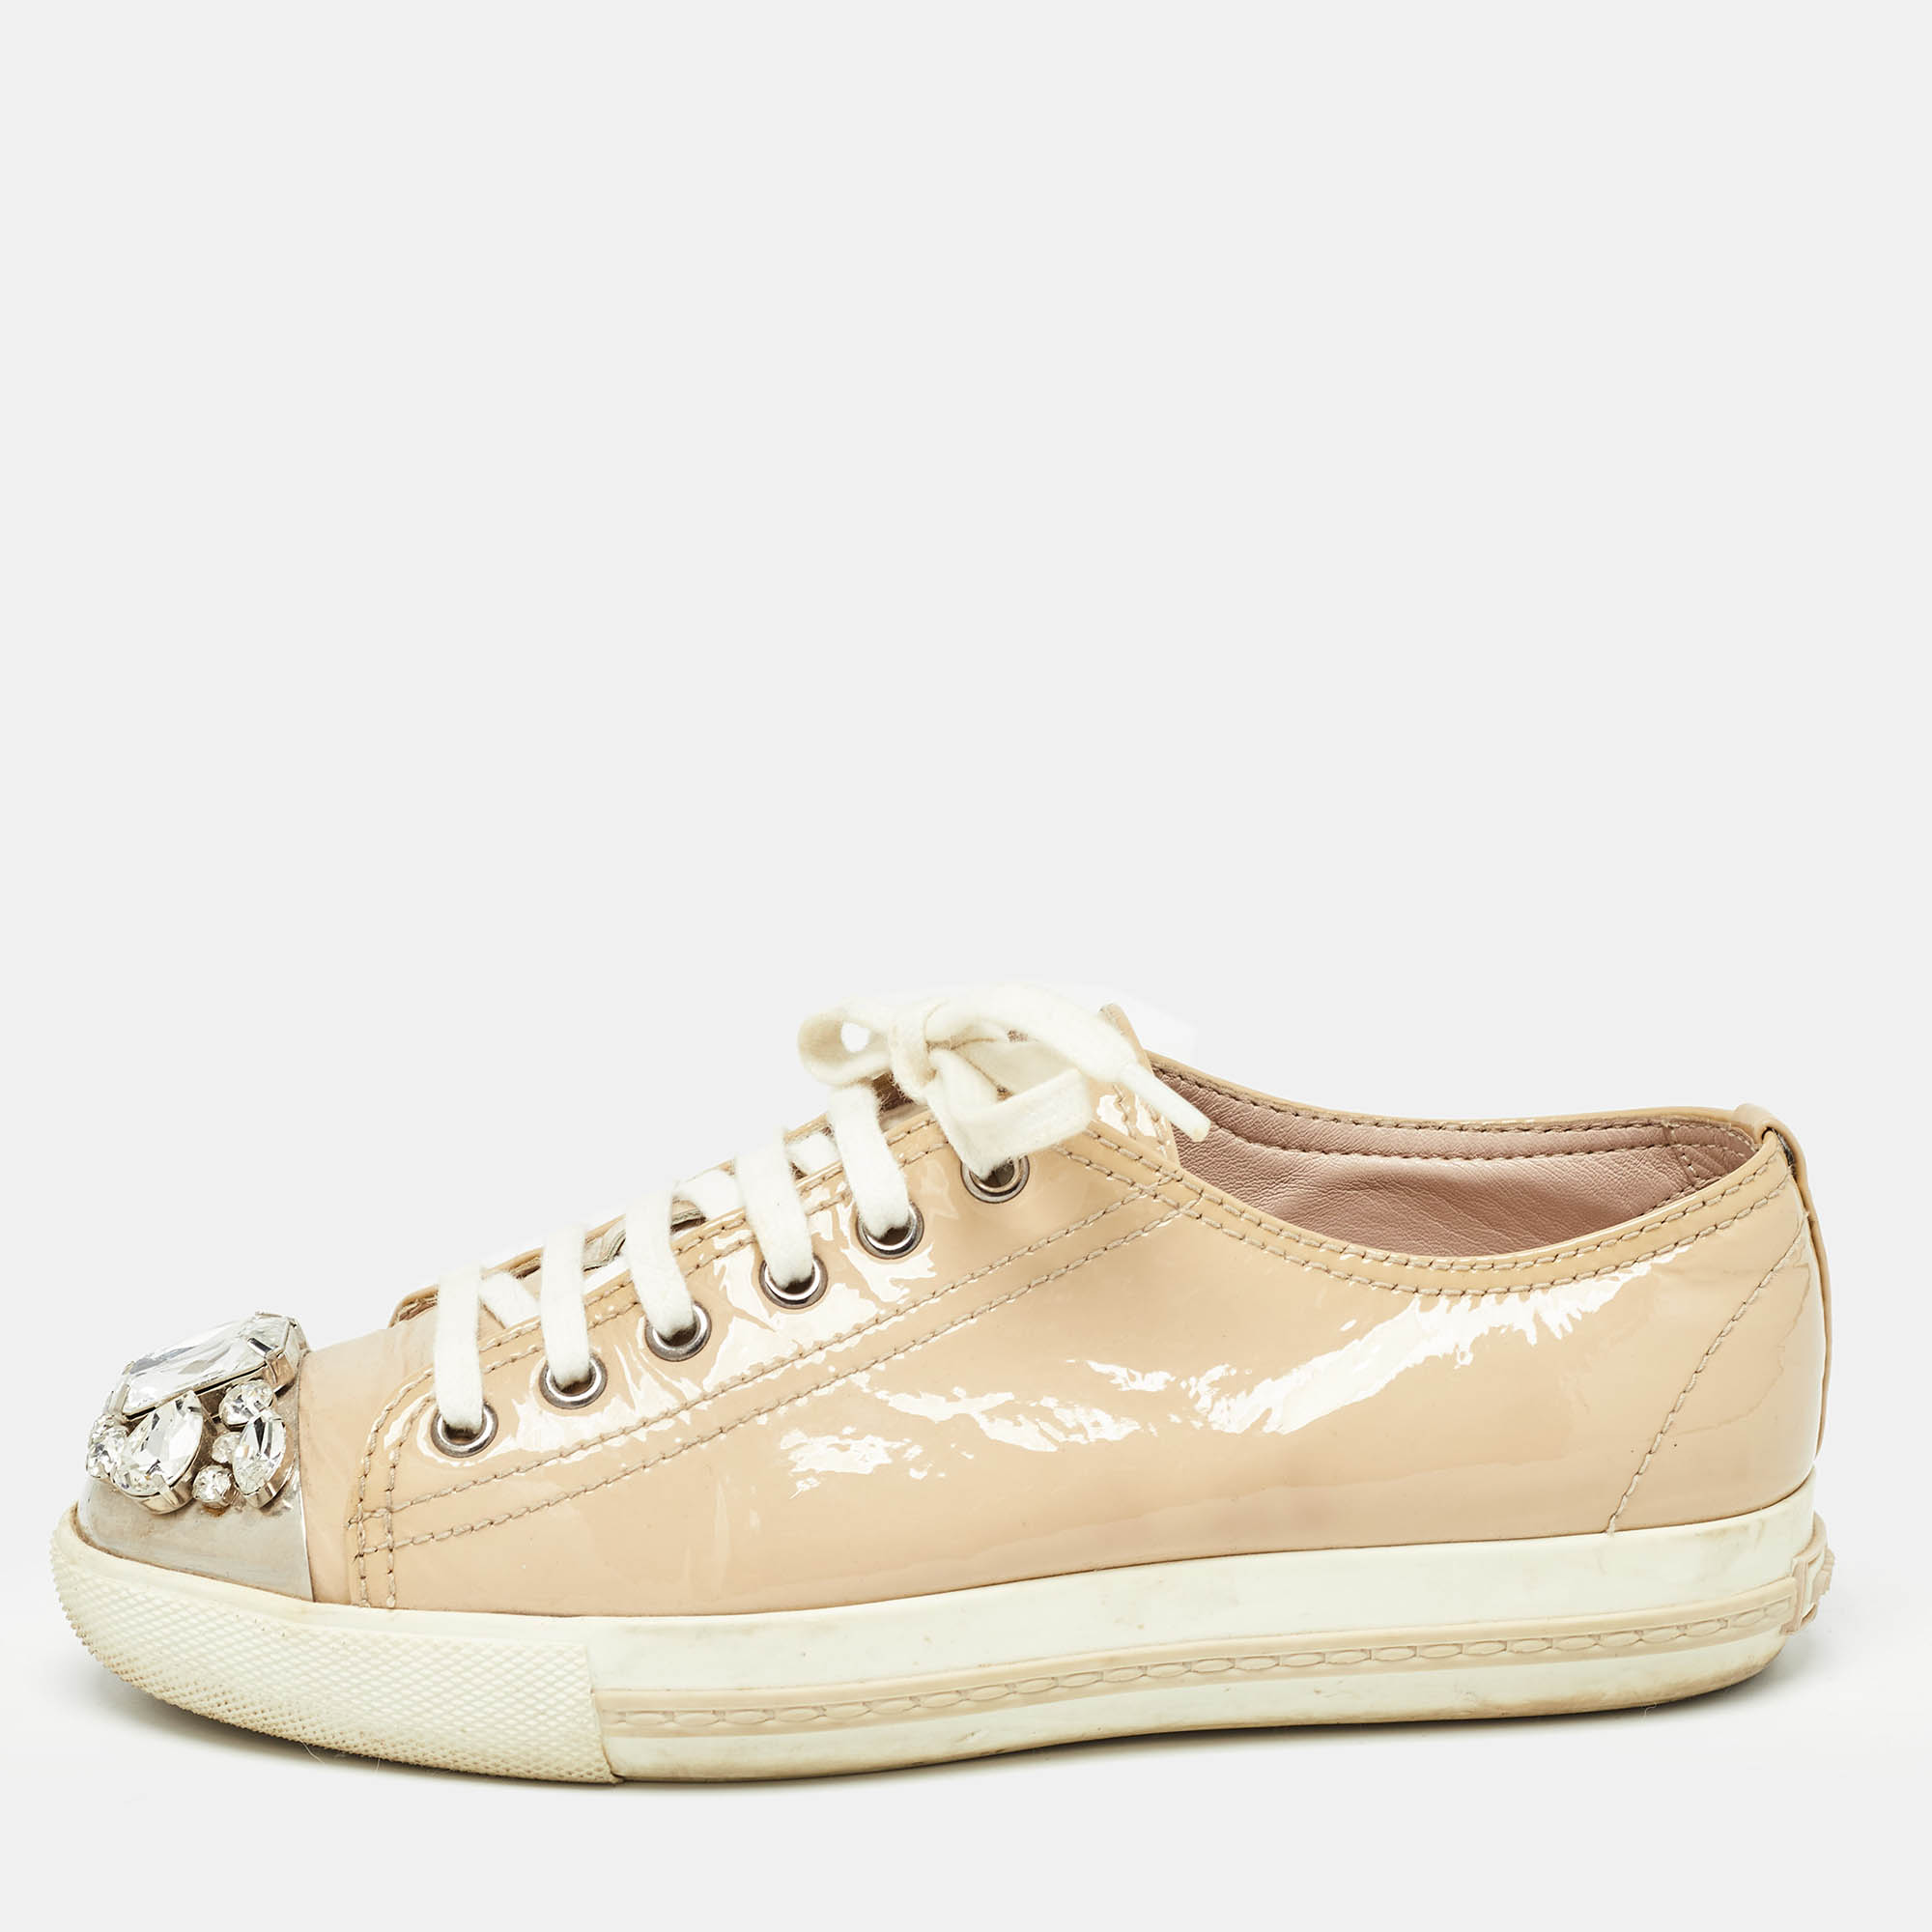 Miu miu beige patent leather crystal embellished lace up sneakers size 36